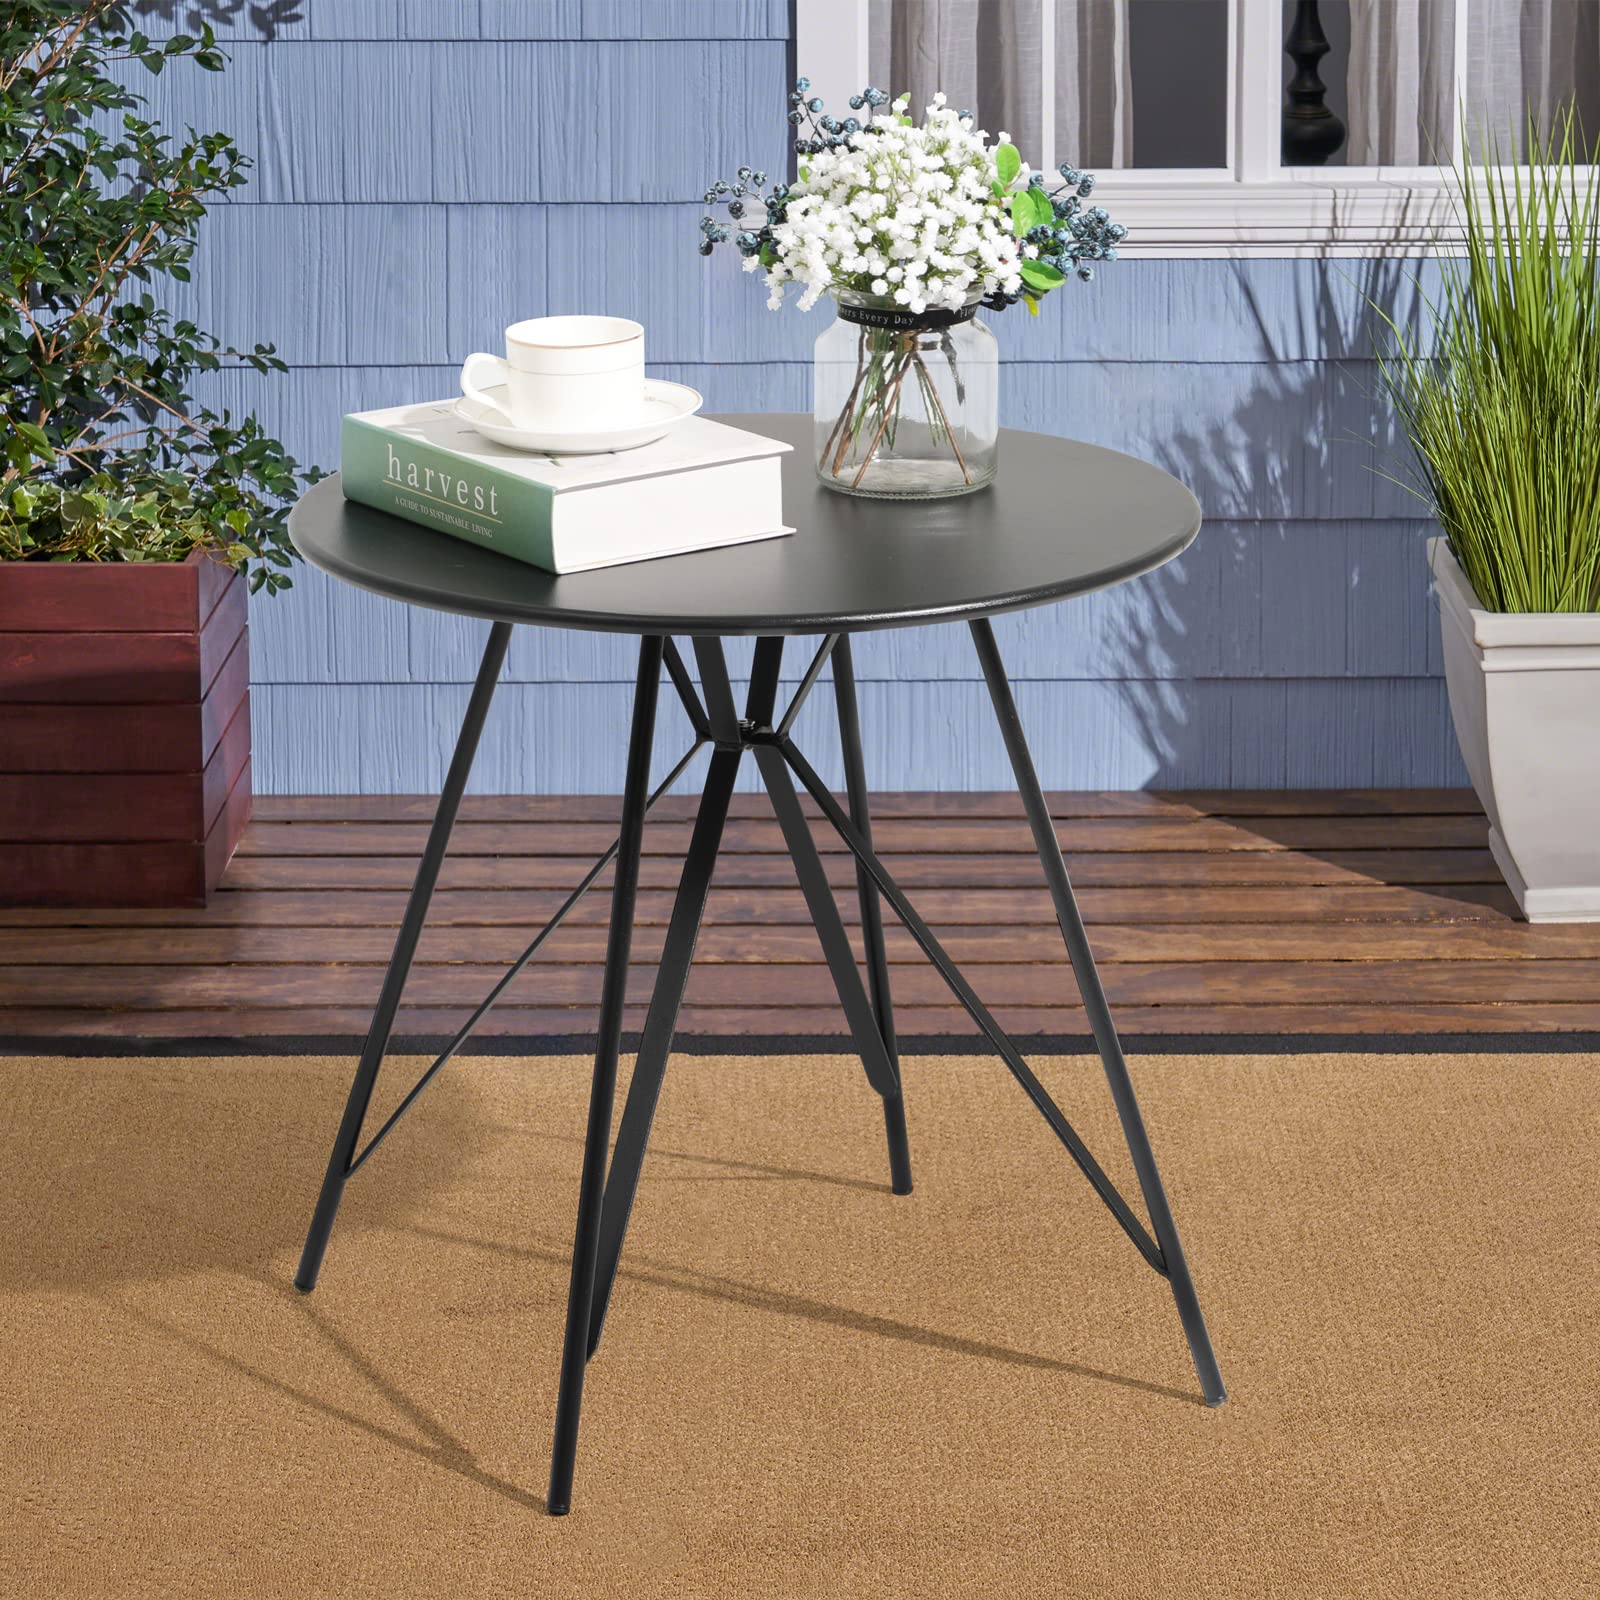  Outdoor Side Table, Patio Round Metal Coffee Snake End Table (Black)